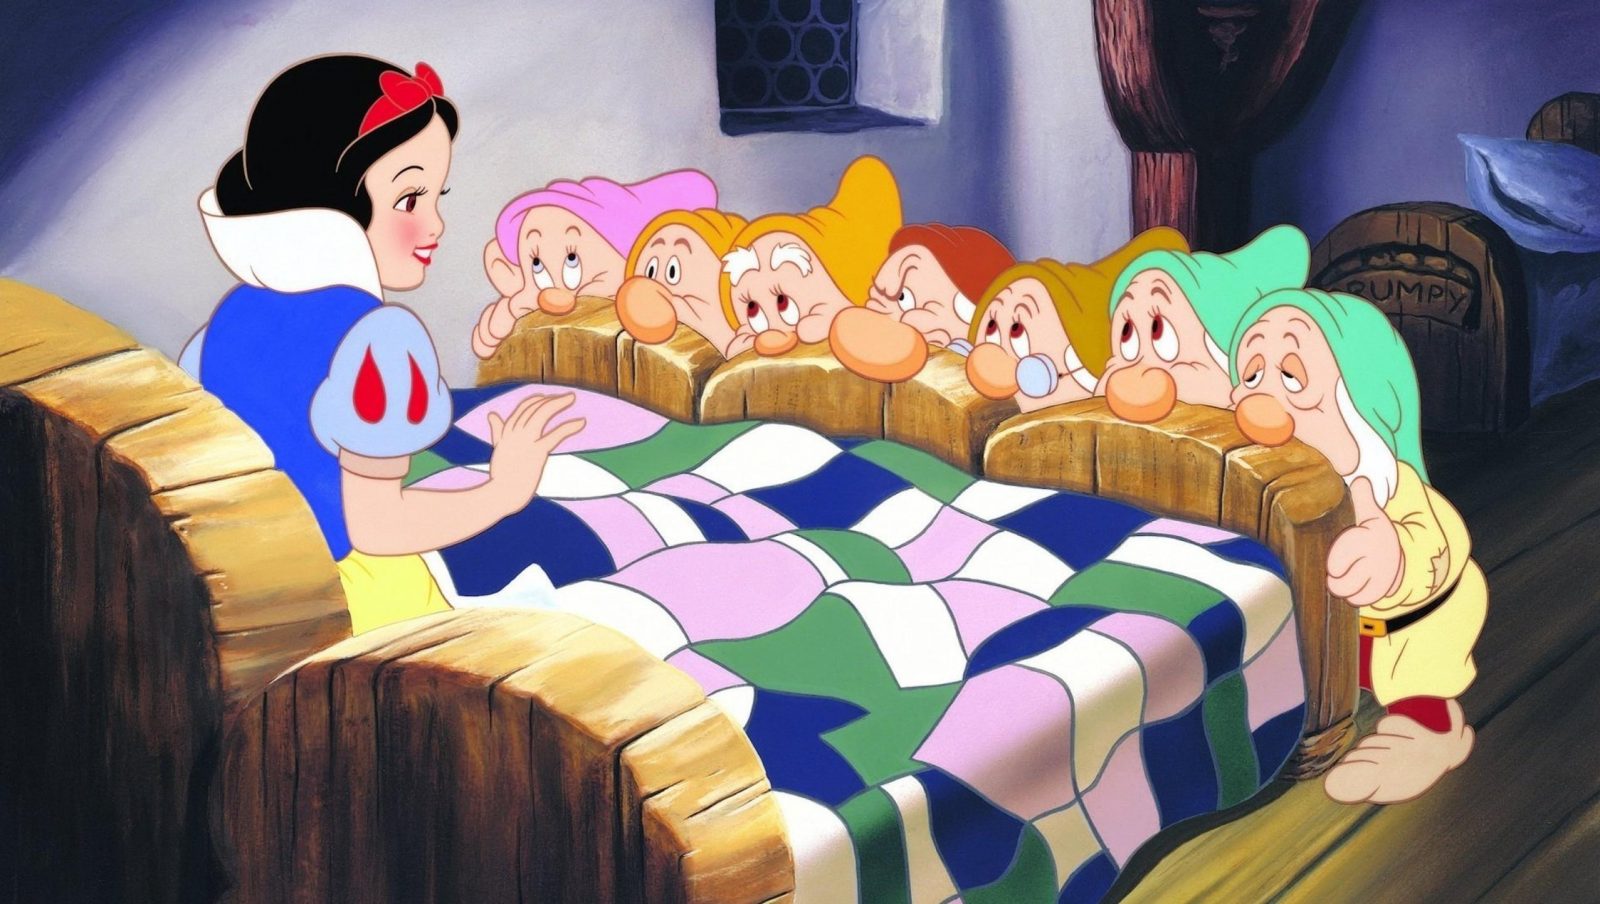 Only Someone That Knows Everything Can Score 12/15 on This General Knowledge Quiz Snow White And The Seven Dwarfs 1937